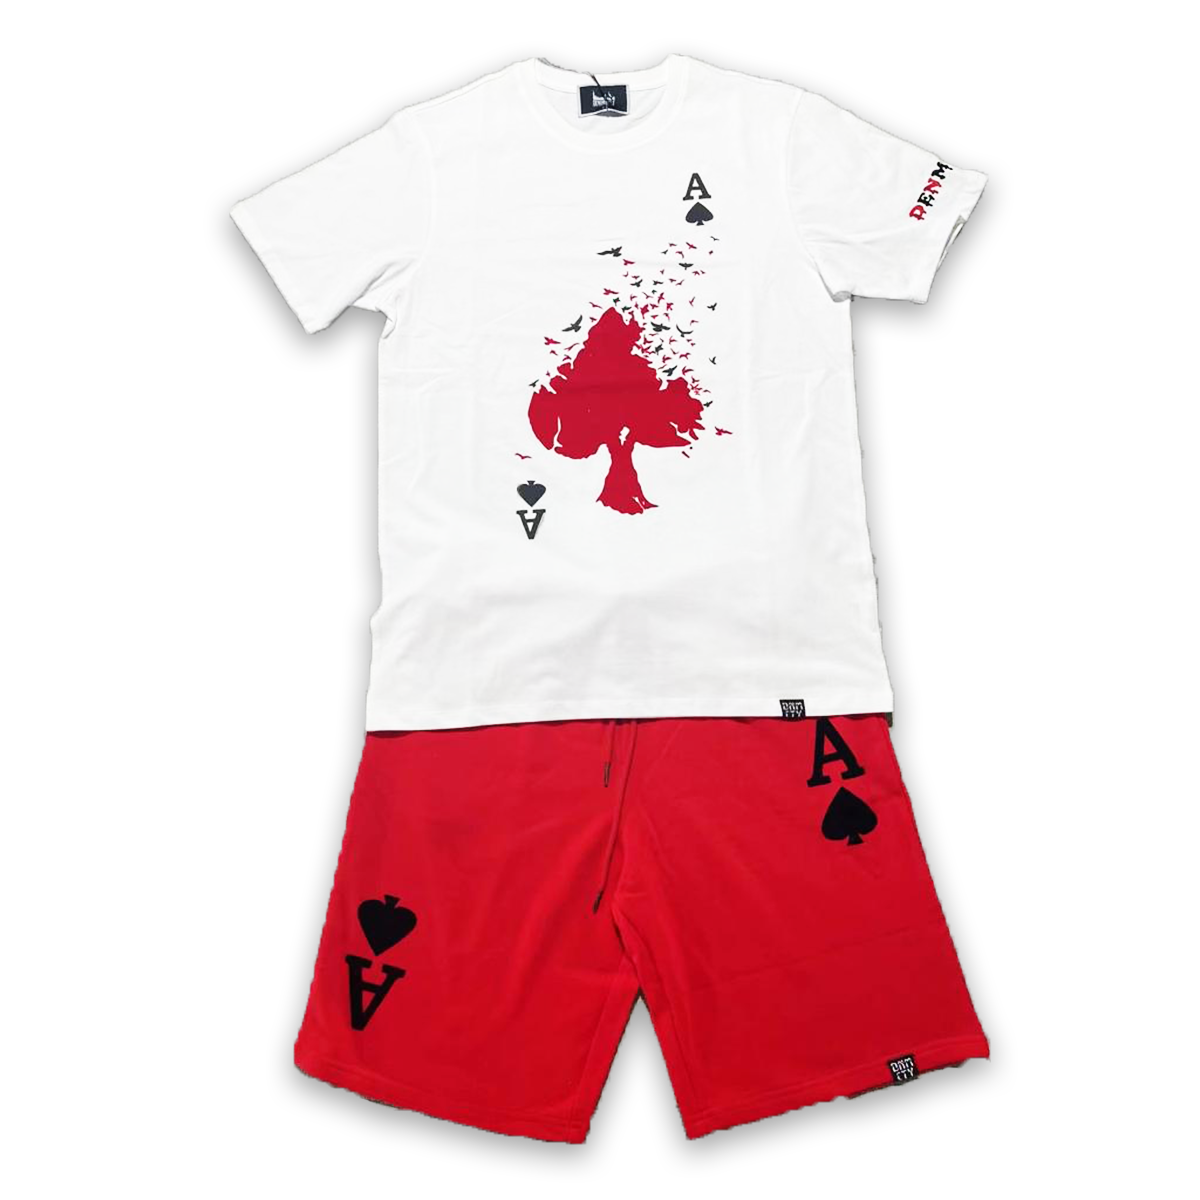 Ace Of Spade Set - White/Red